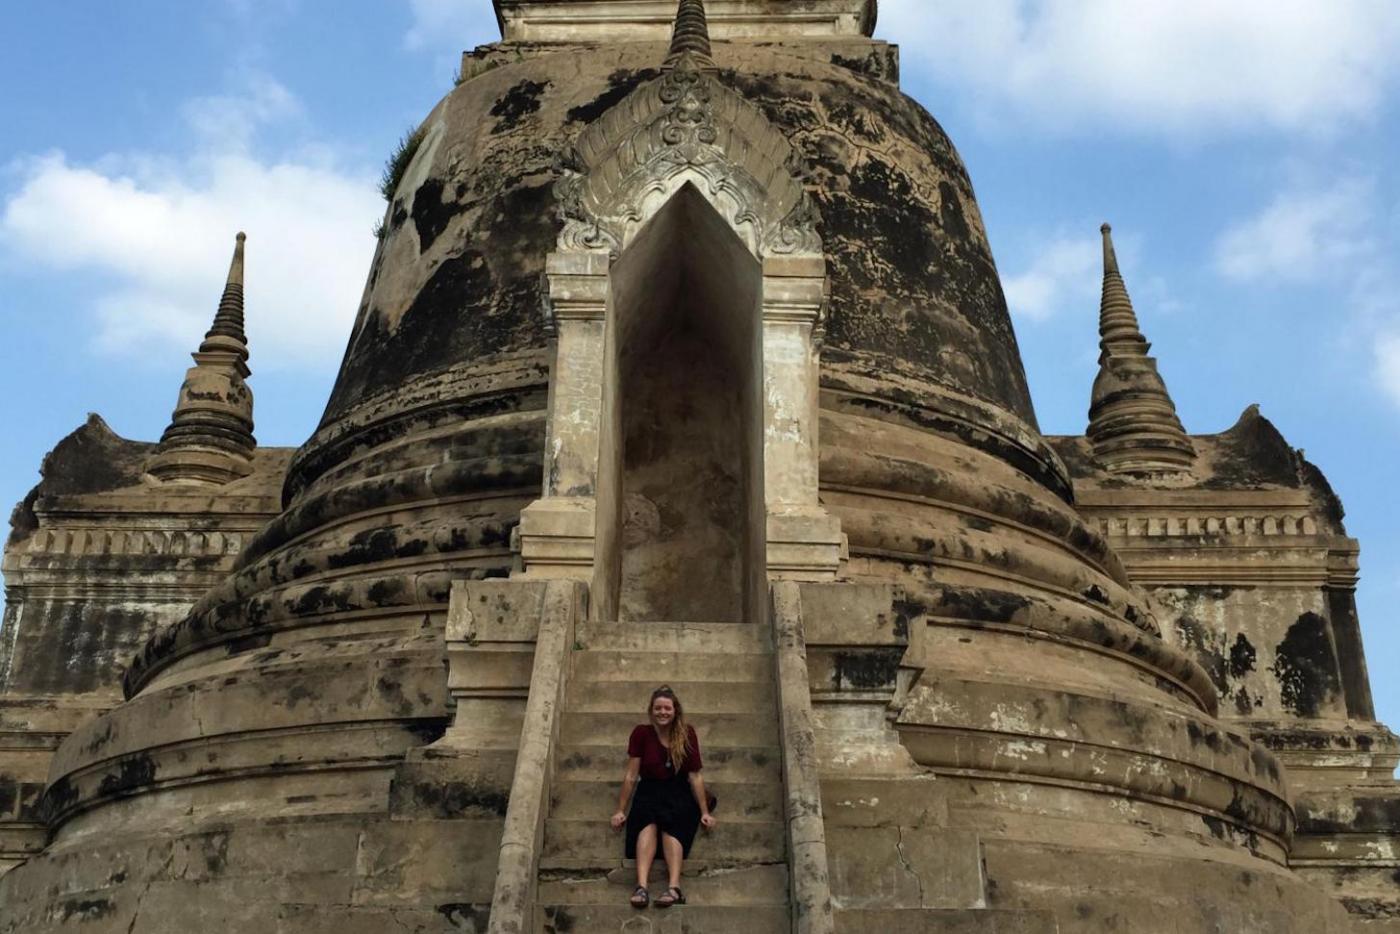 Kelly sits on the ruins of Wat Phra Si Sanphet in Ayutthaya, Thailand.